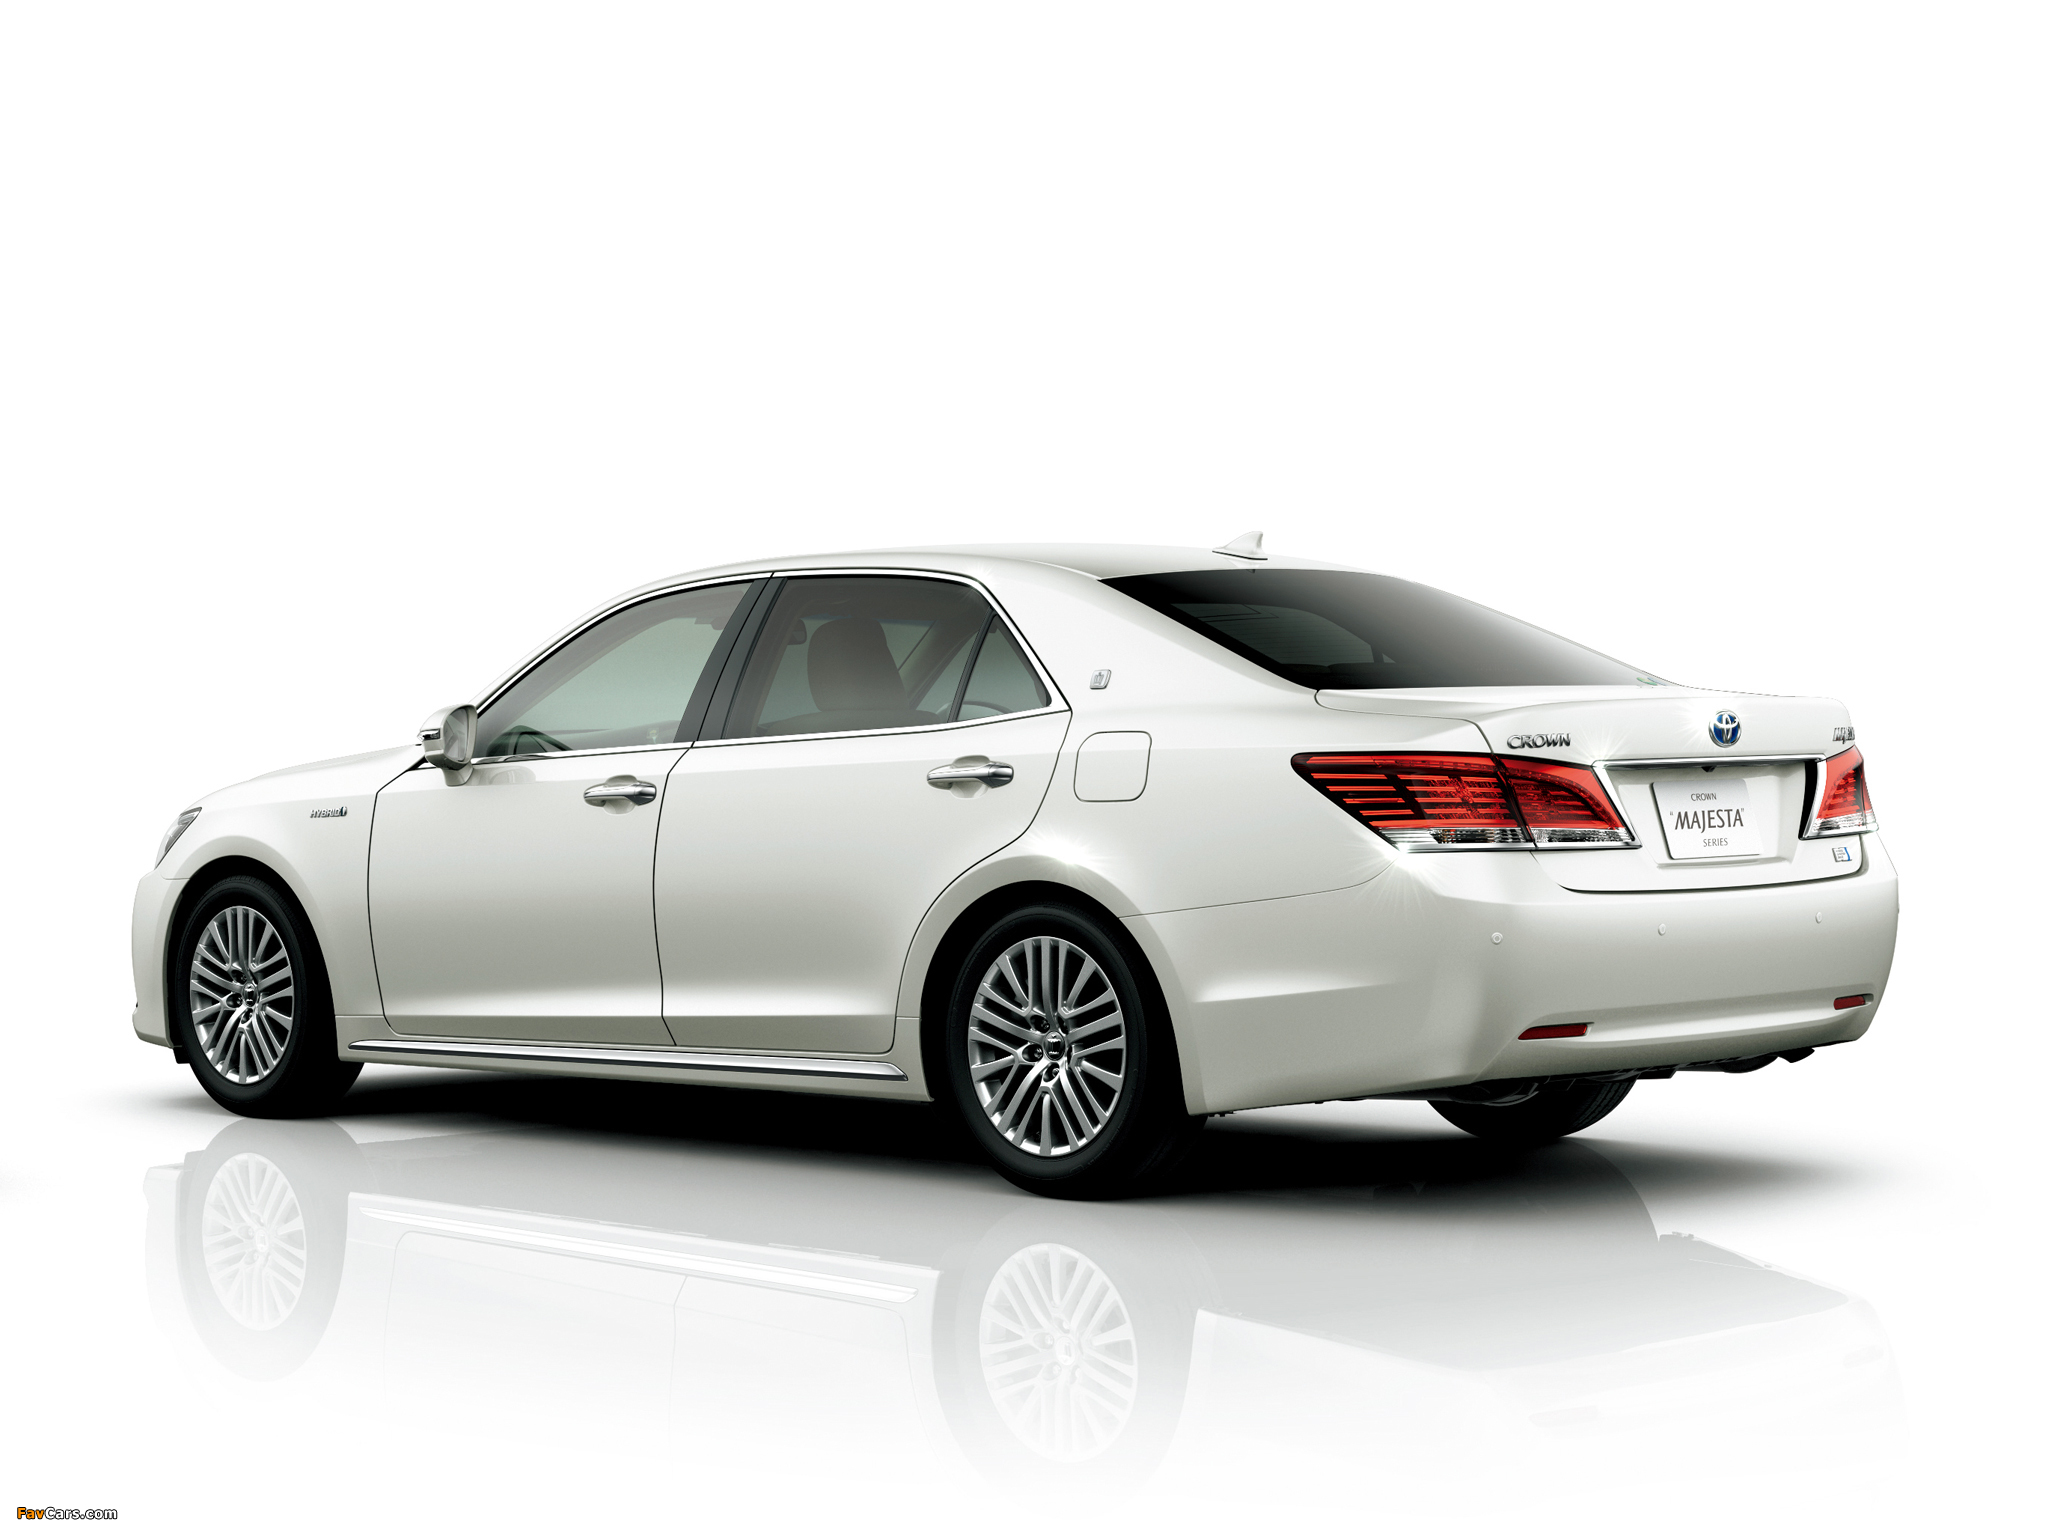 Toyota Crown Majesta | Japanese Vehicle Specifications ...